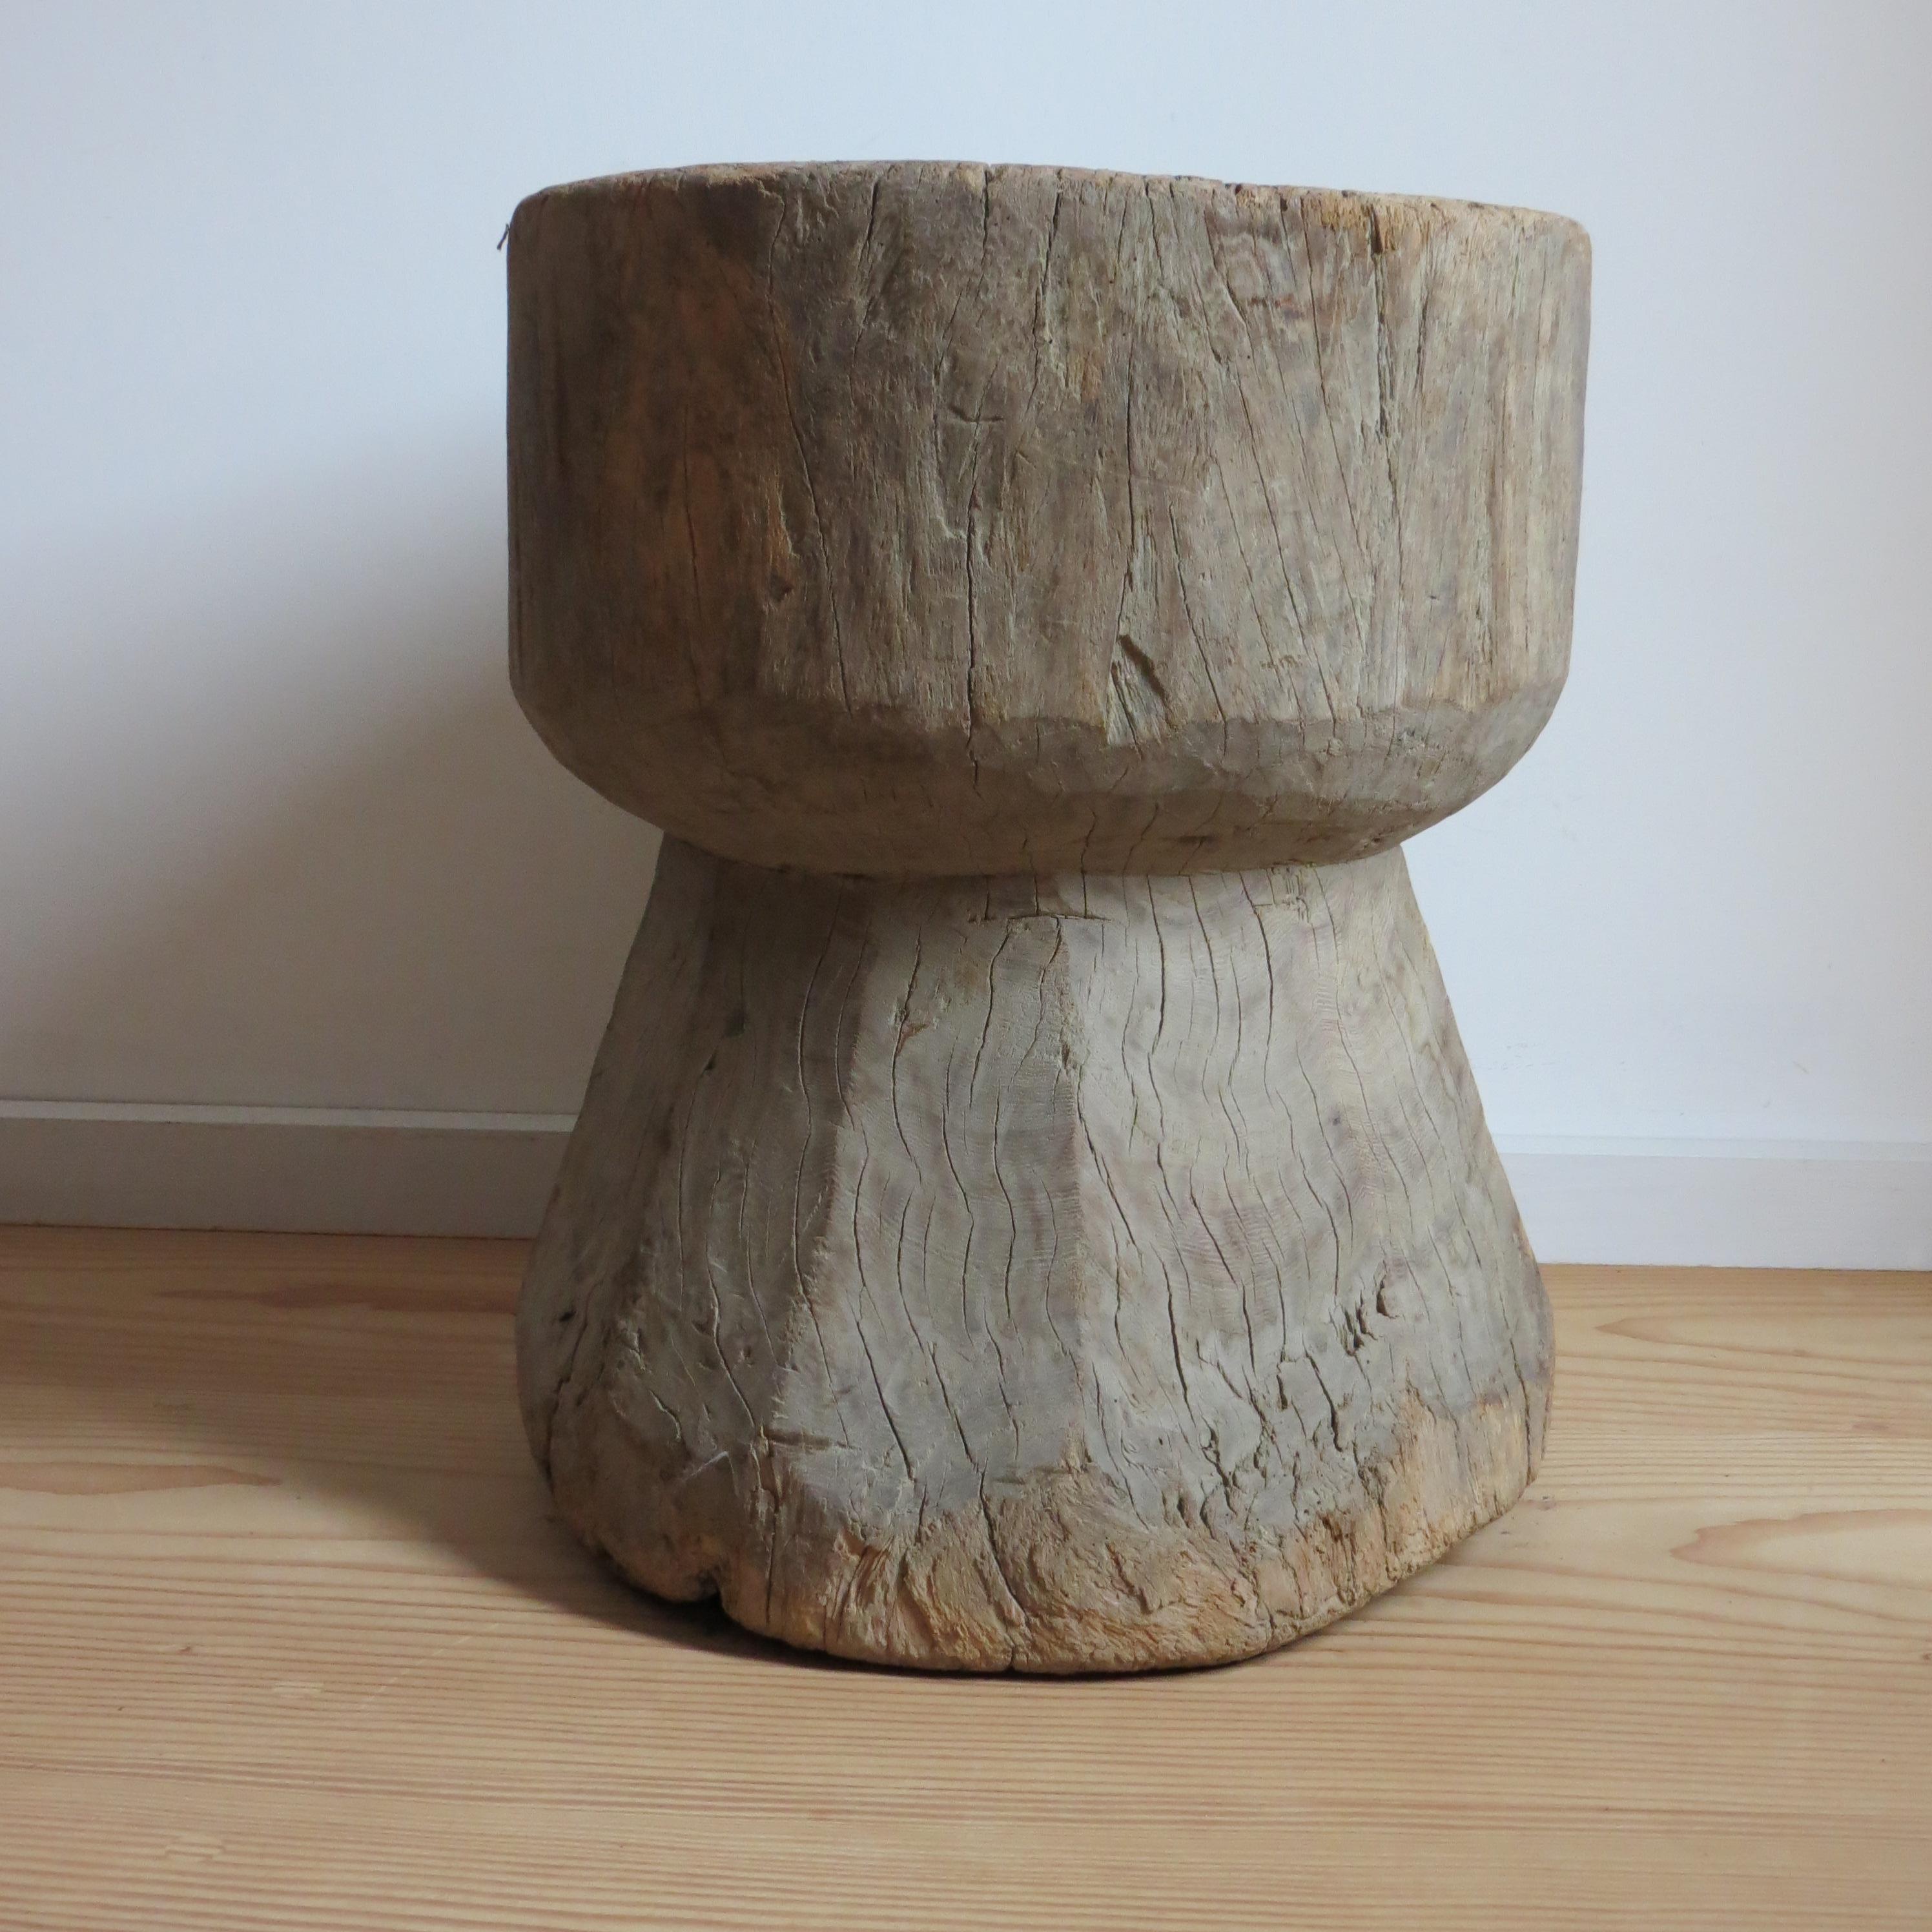 Antique Primitive Rustic Large Mortar wooden chunky table or Stool African In Good Condition For Sale In Stow on the Wold, GB